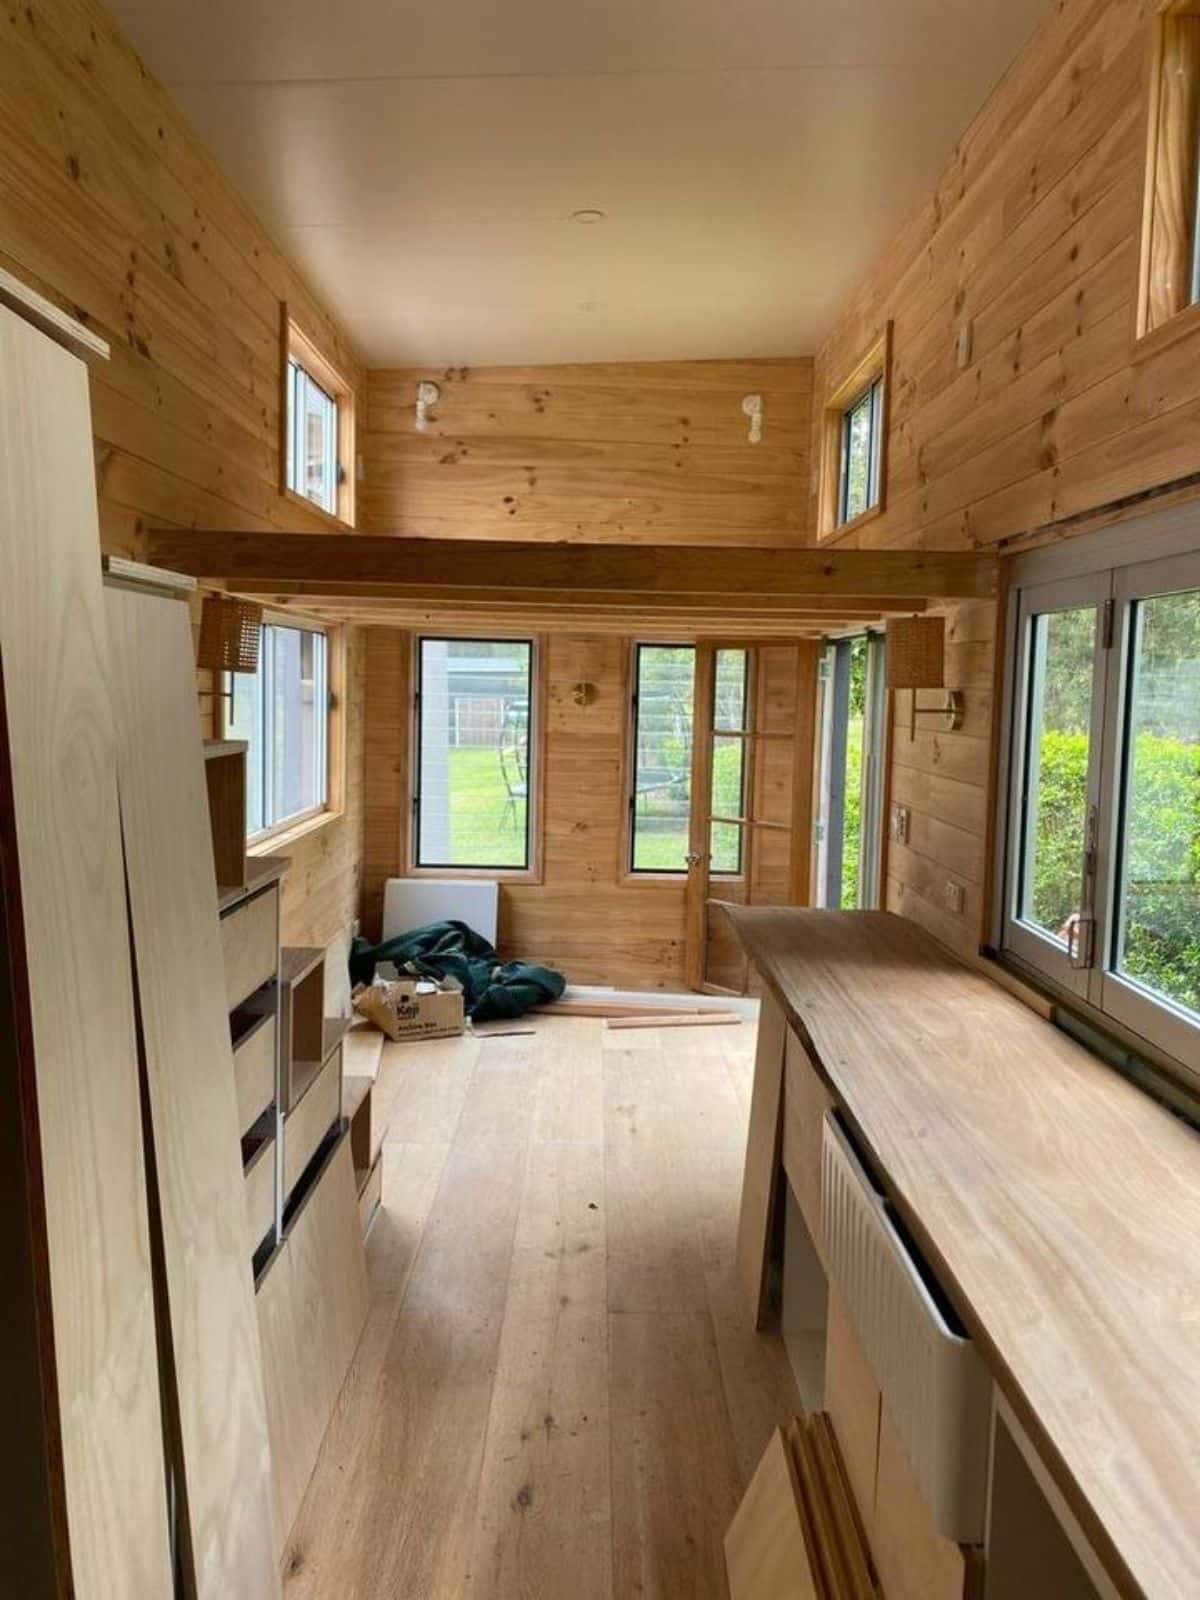 WIP wooden interiors of Tiny Home In Australia